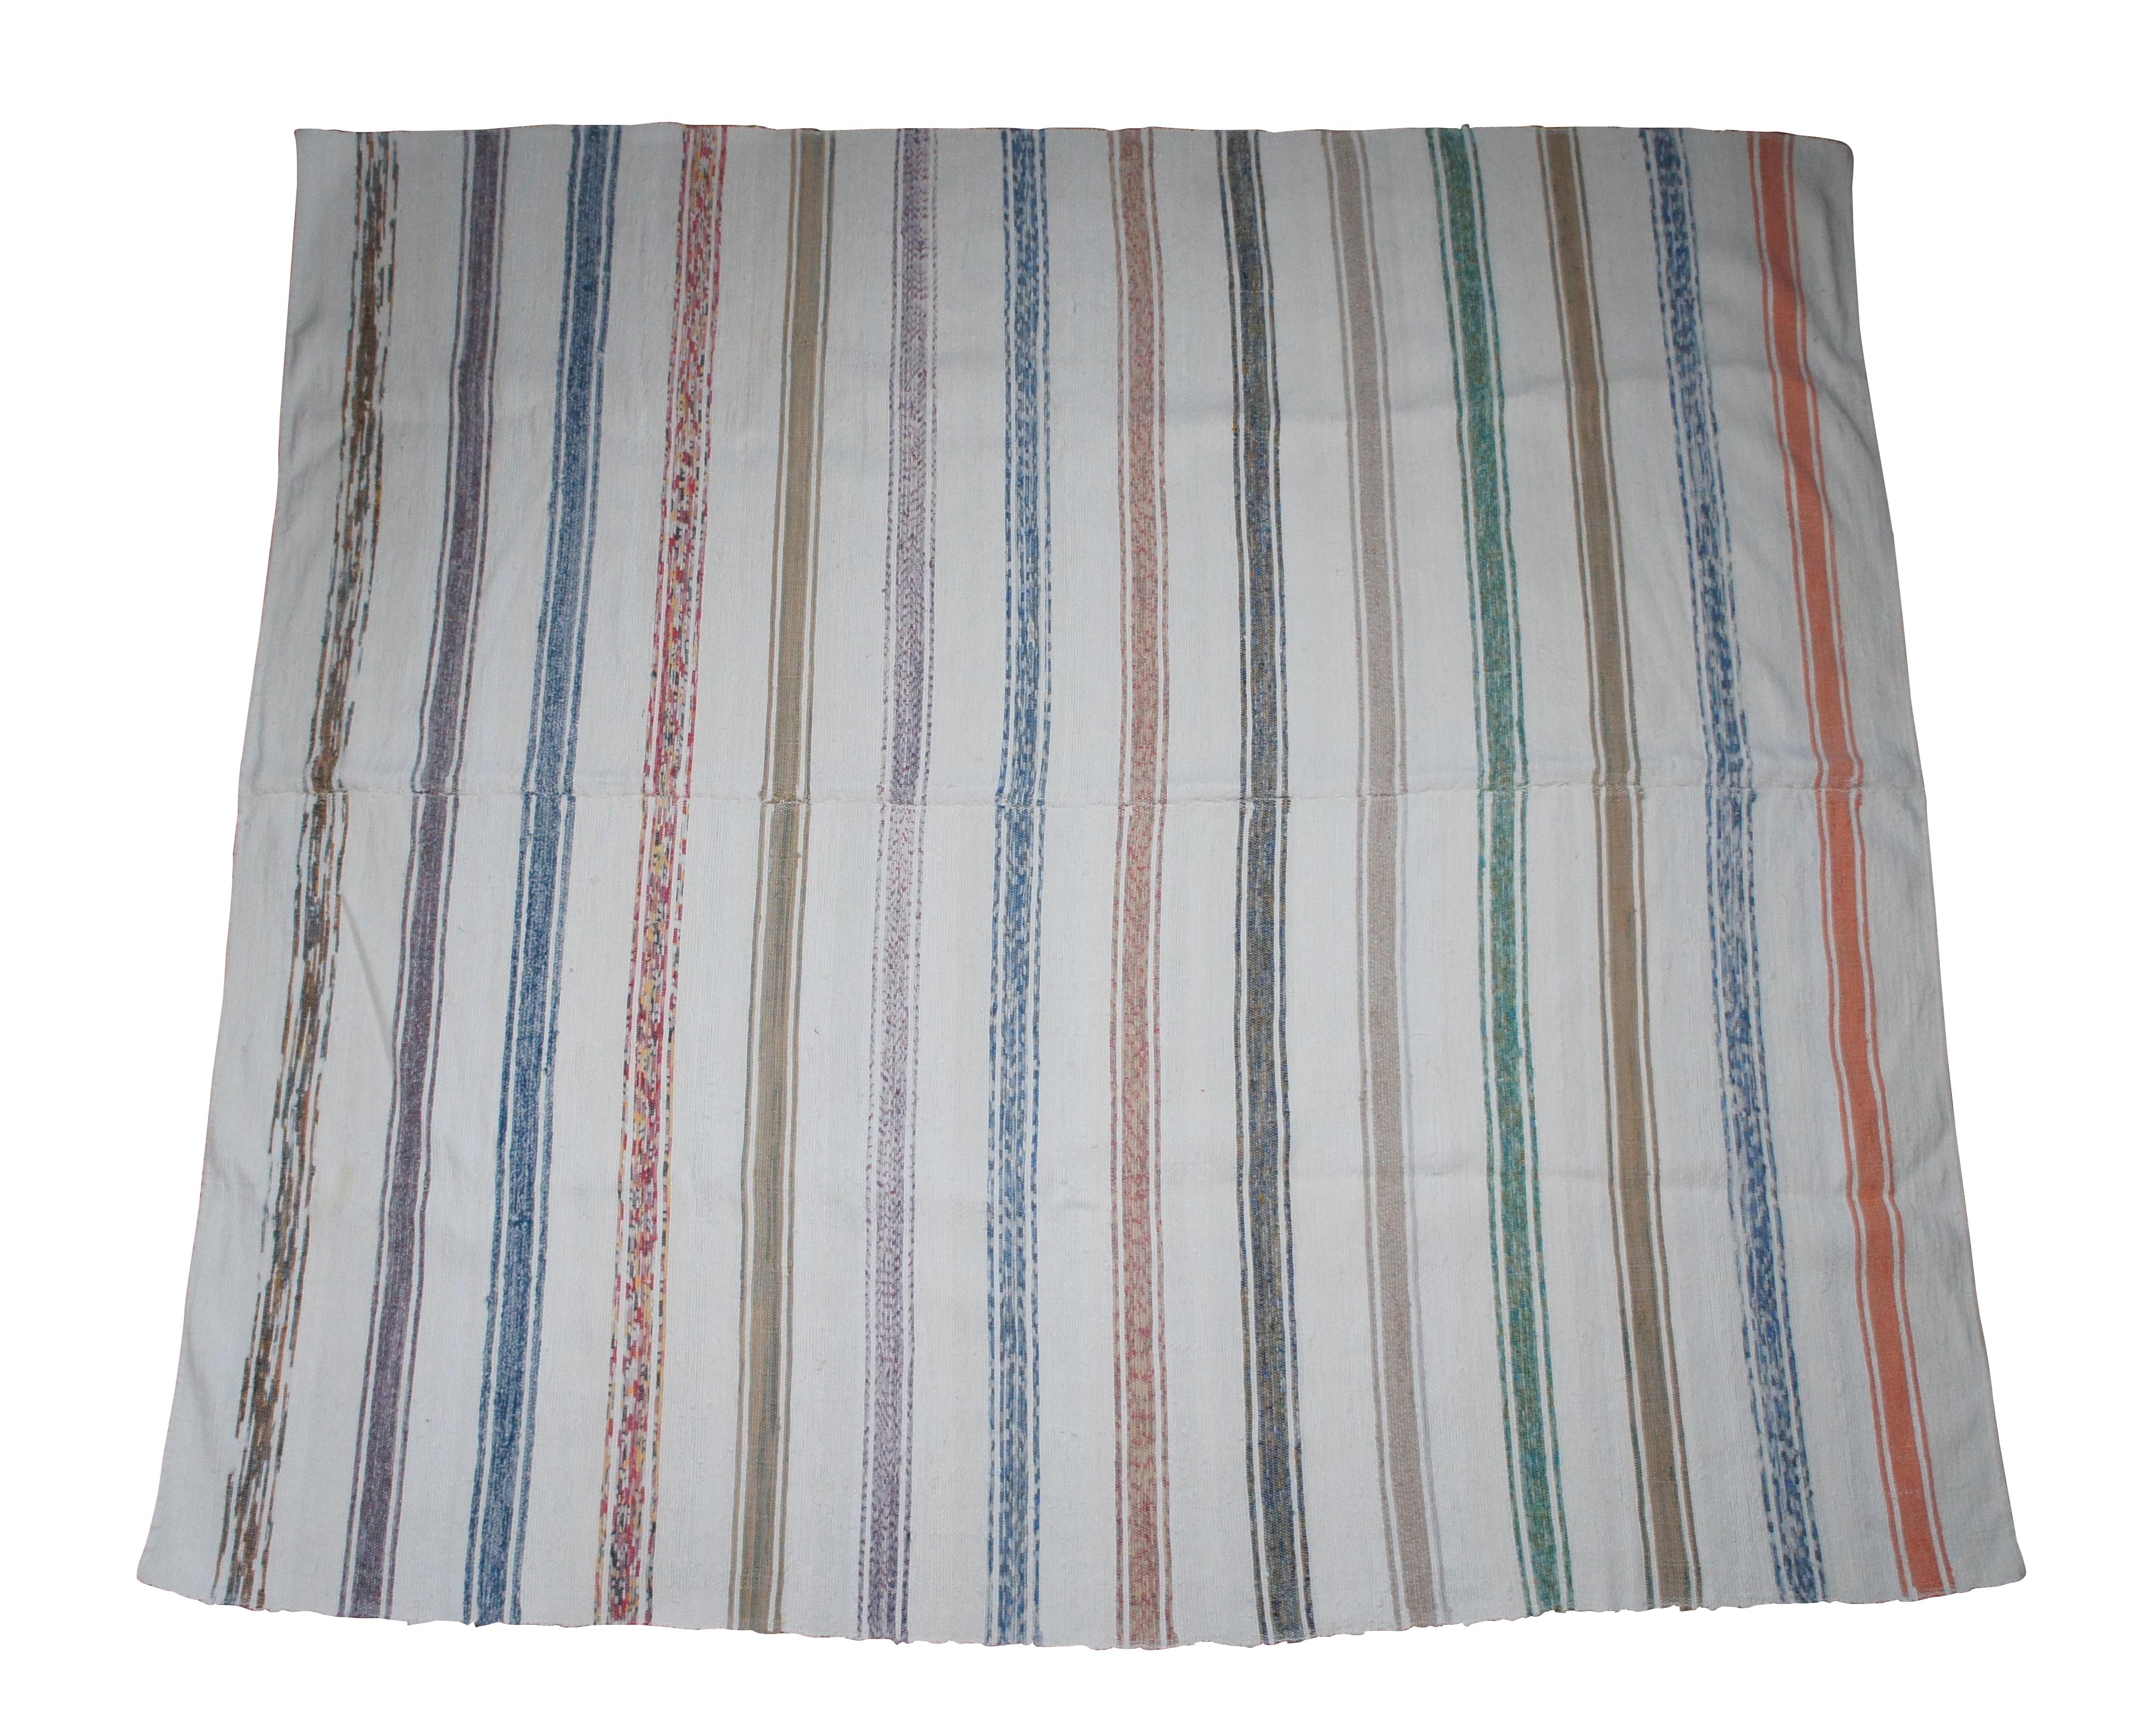 Pair of vintage hand loomed blankets or floor coverings.  Features a striped cotton pattern.

Dimensions:
White Stripe - 72